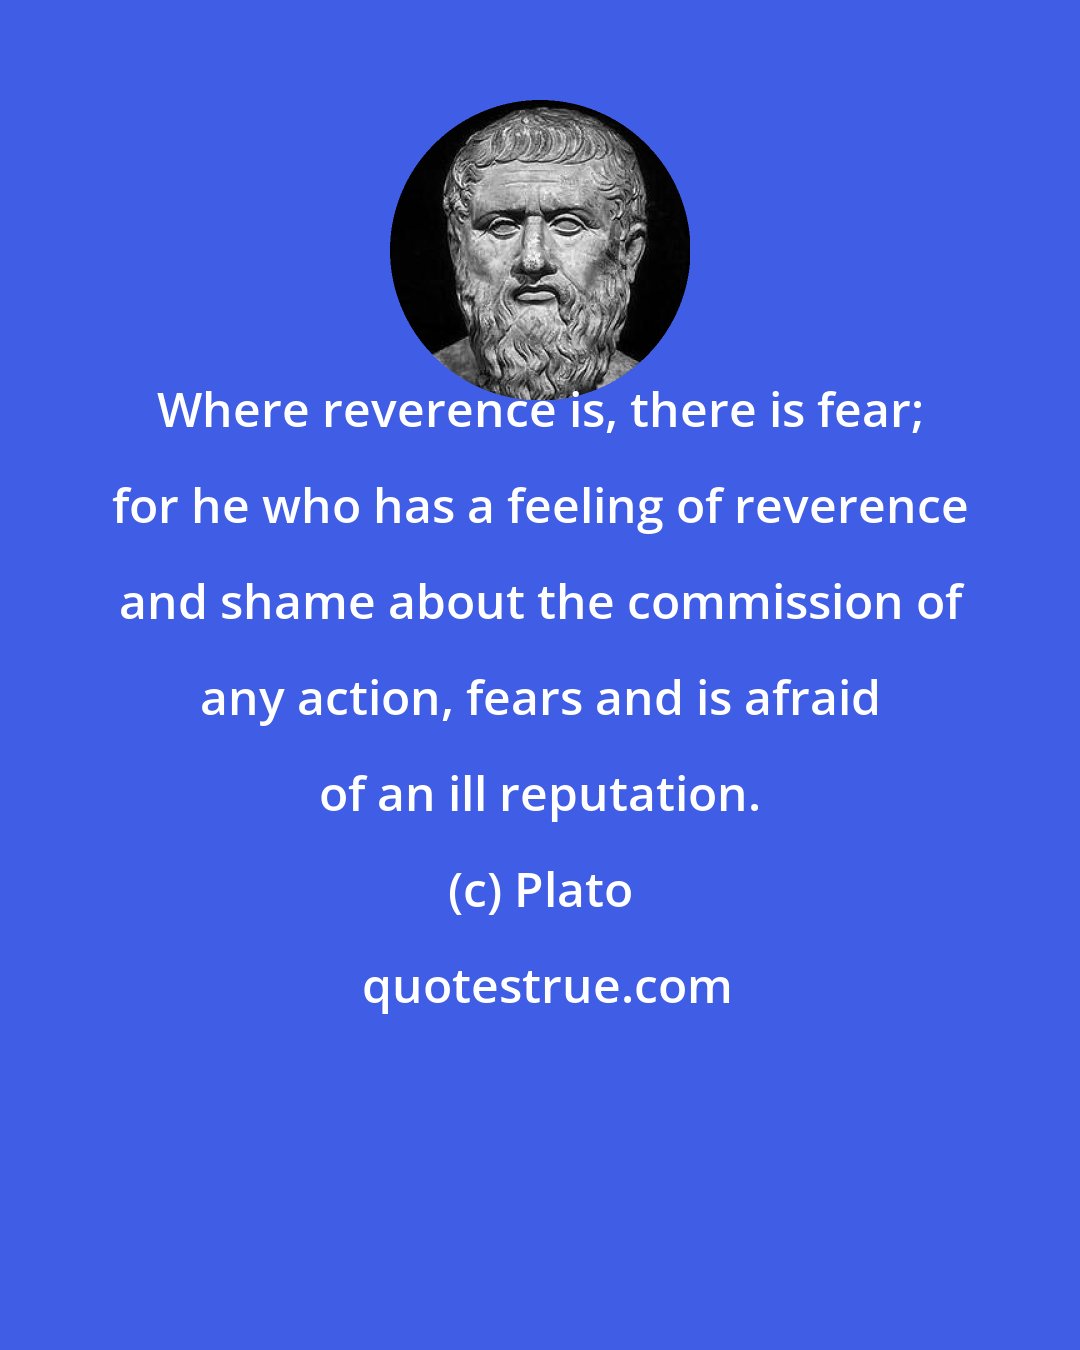 Plato: Where reverence is, there is fear; for he who has a feeling of reverence and shame about the commission of any action, fears and is afraid of an ill reputation.